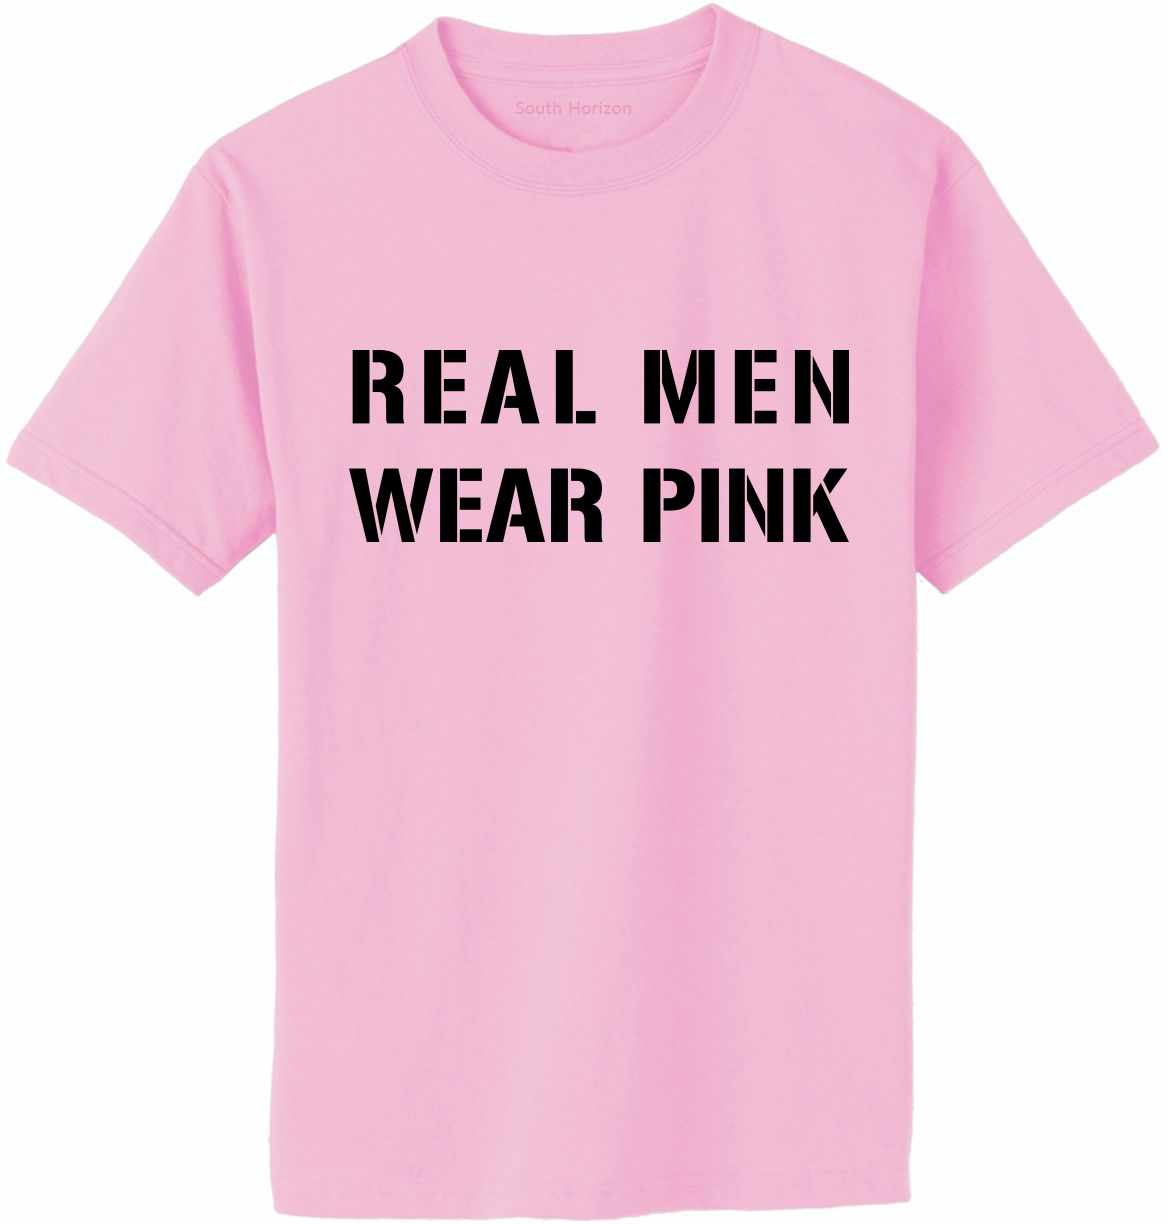 REAL MEN WEAR PINK on Adult T-Shirt